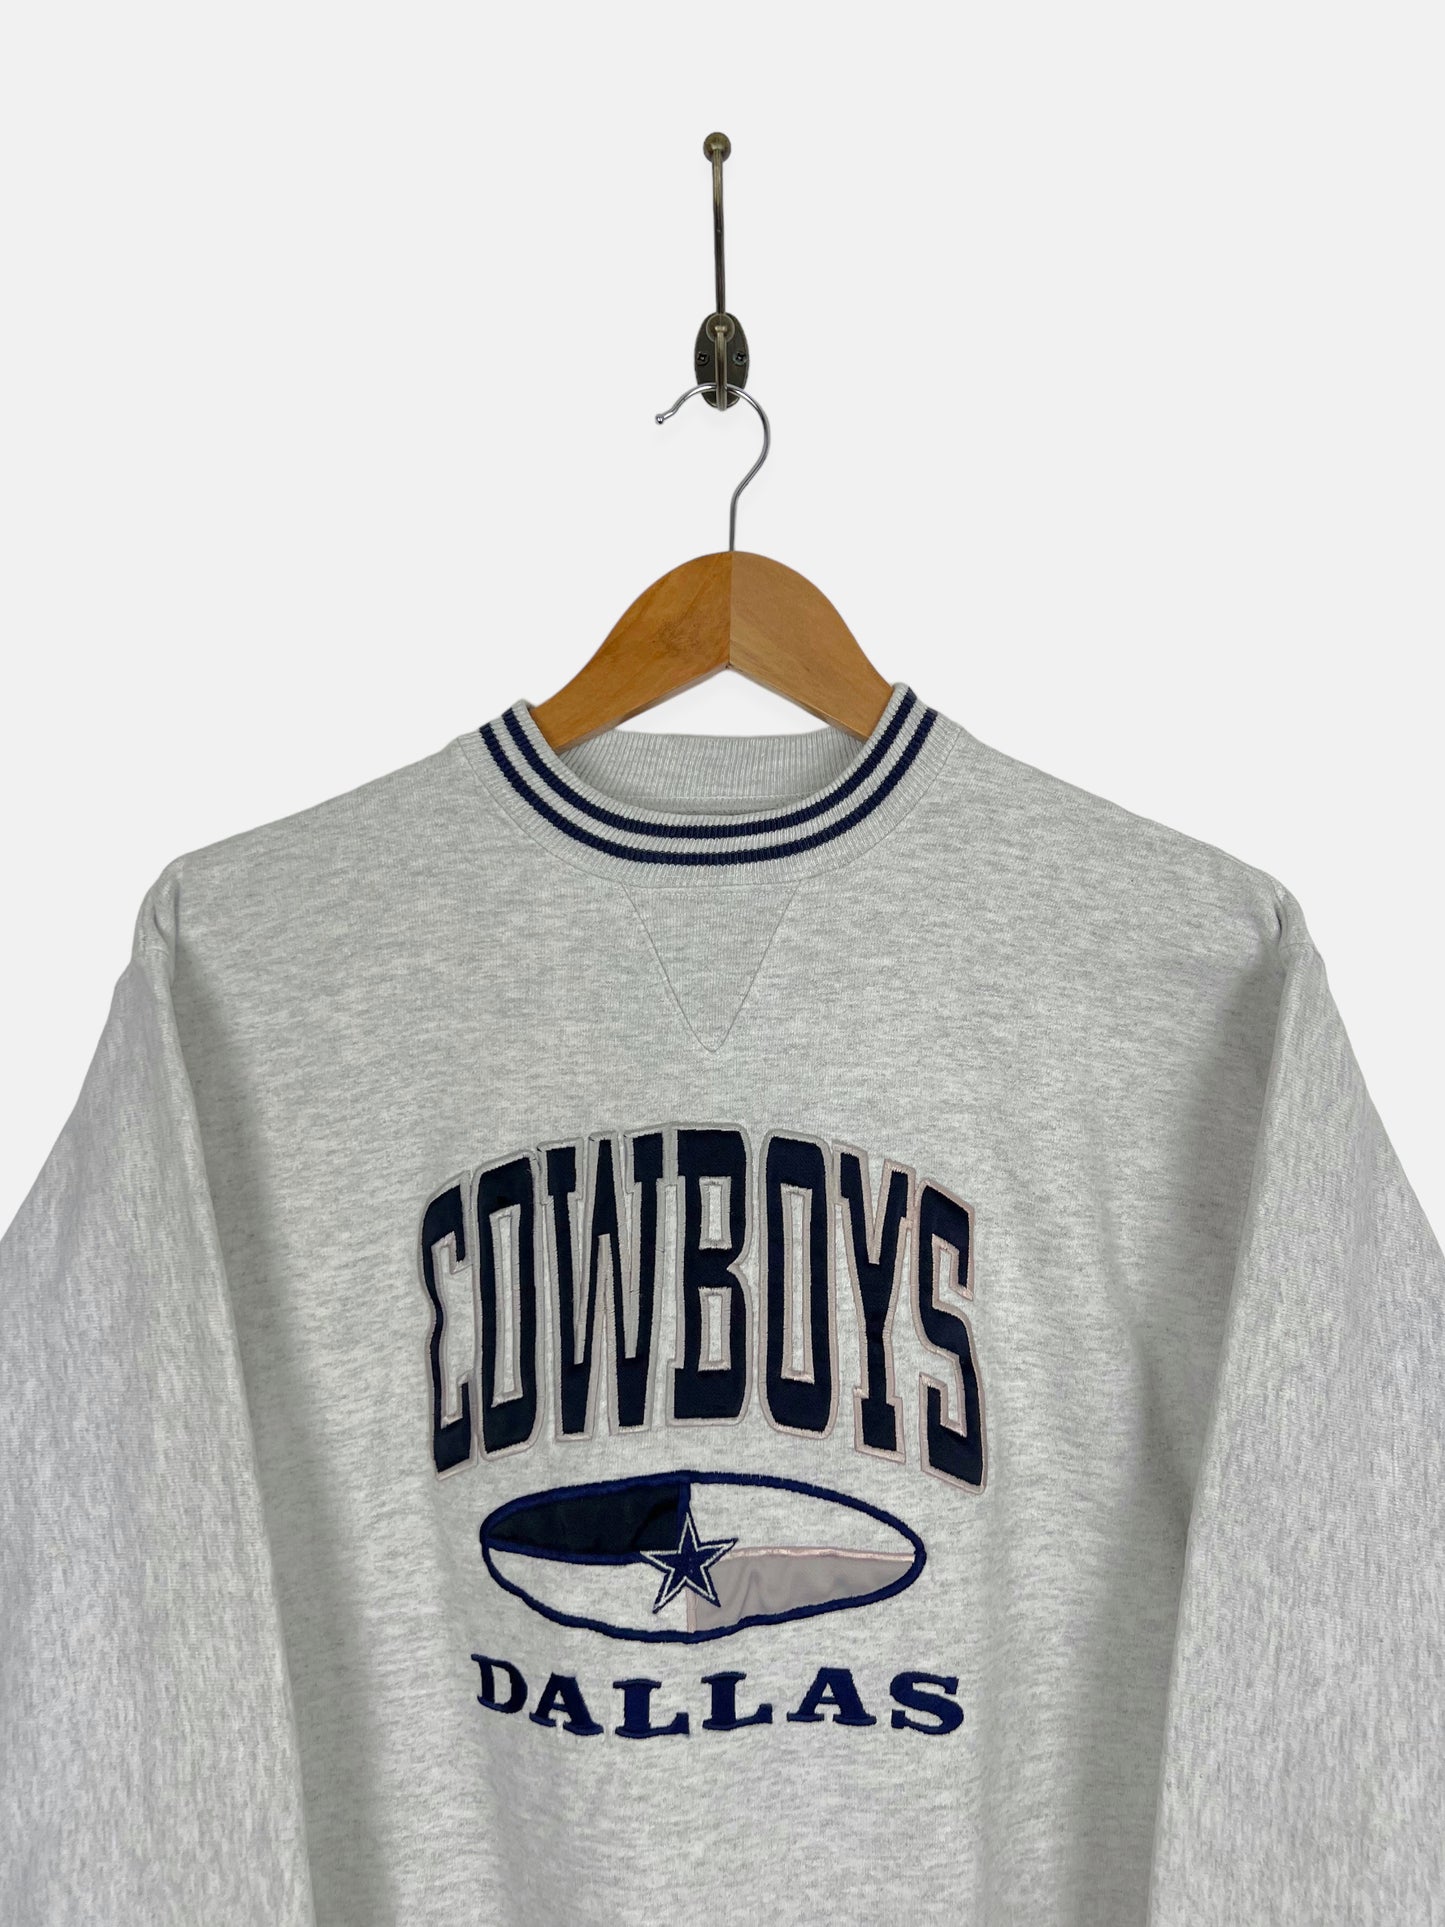 90's Youth Dallas Cowboys NFL USA Made Embroidered Vintage Sweatshirt